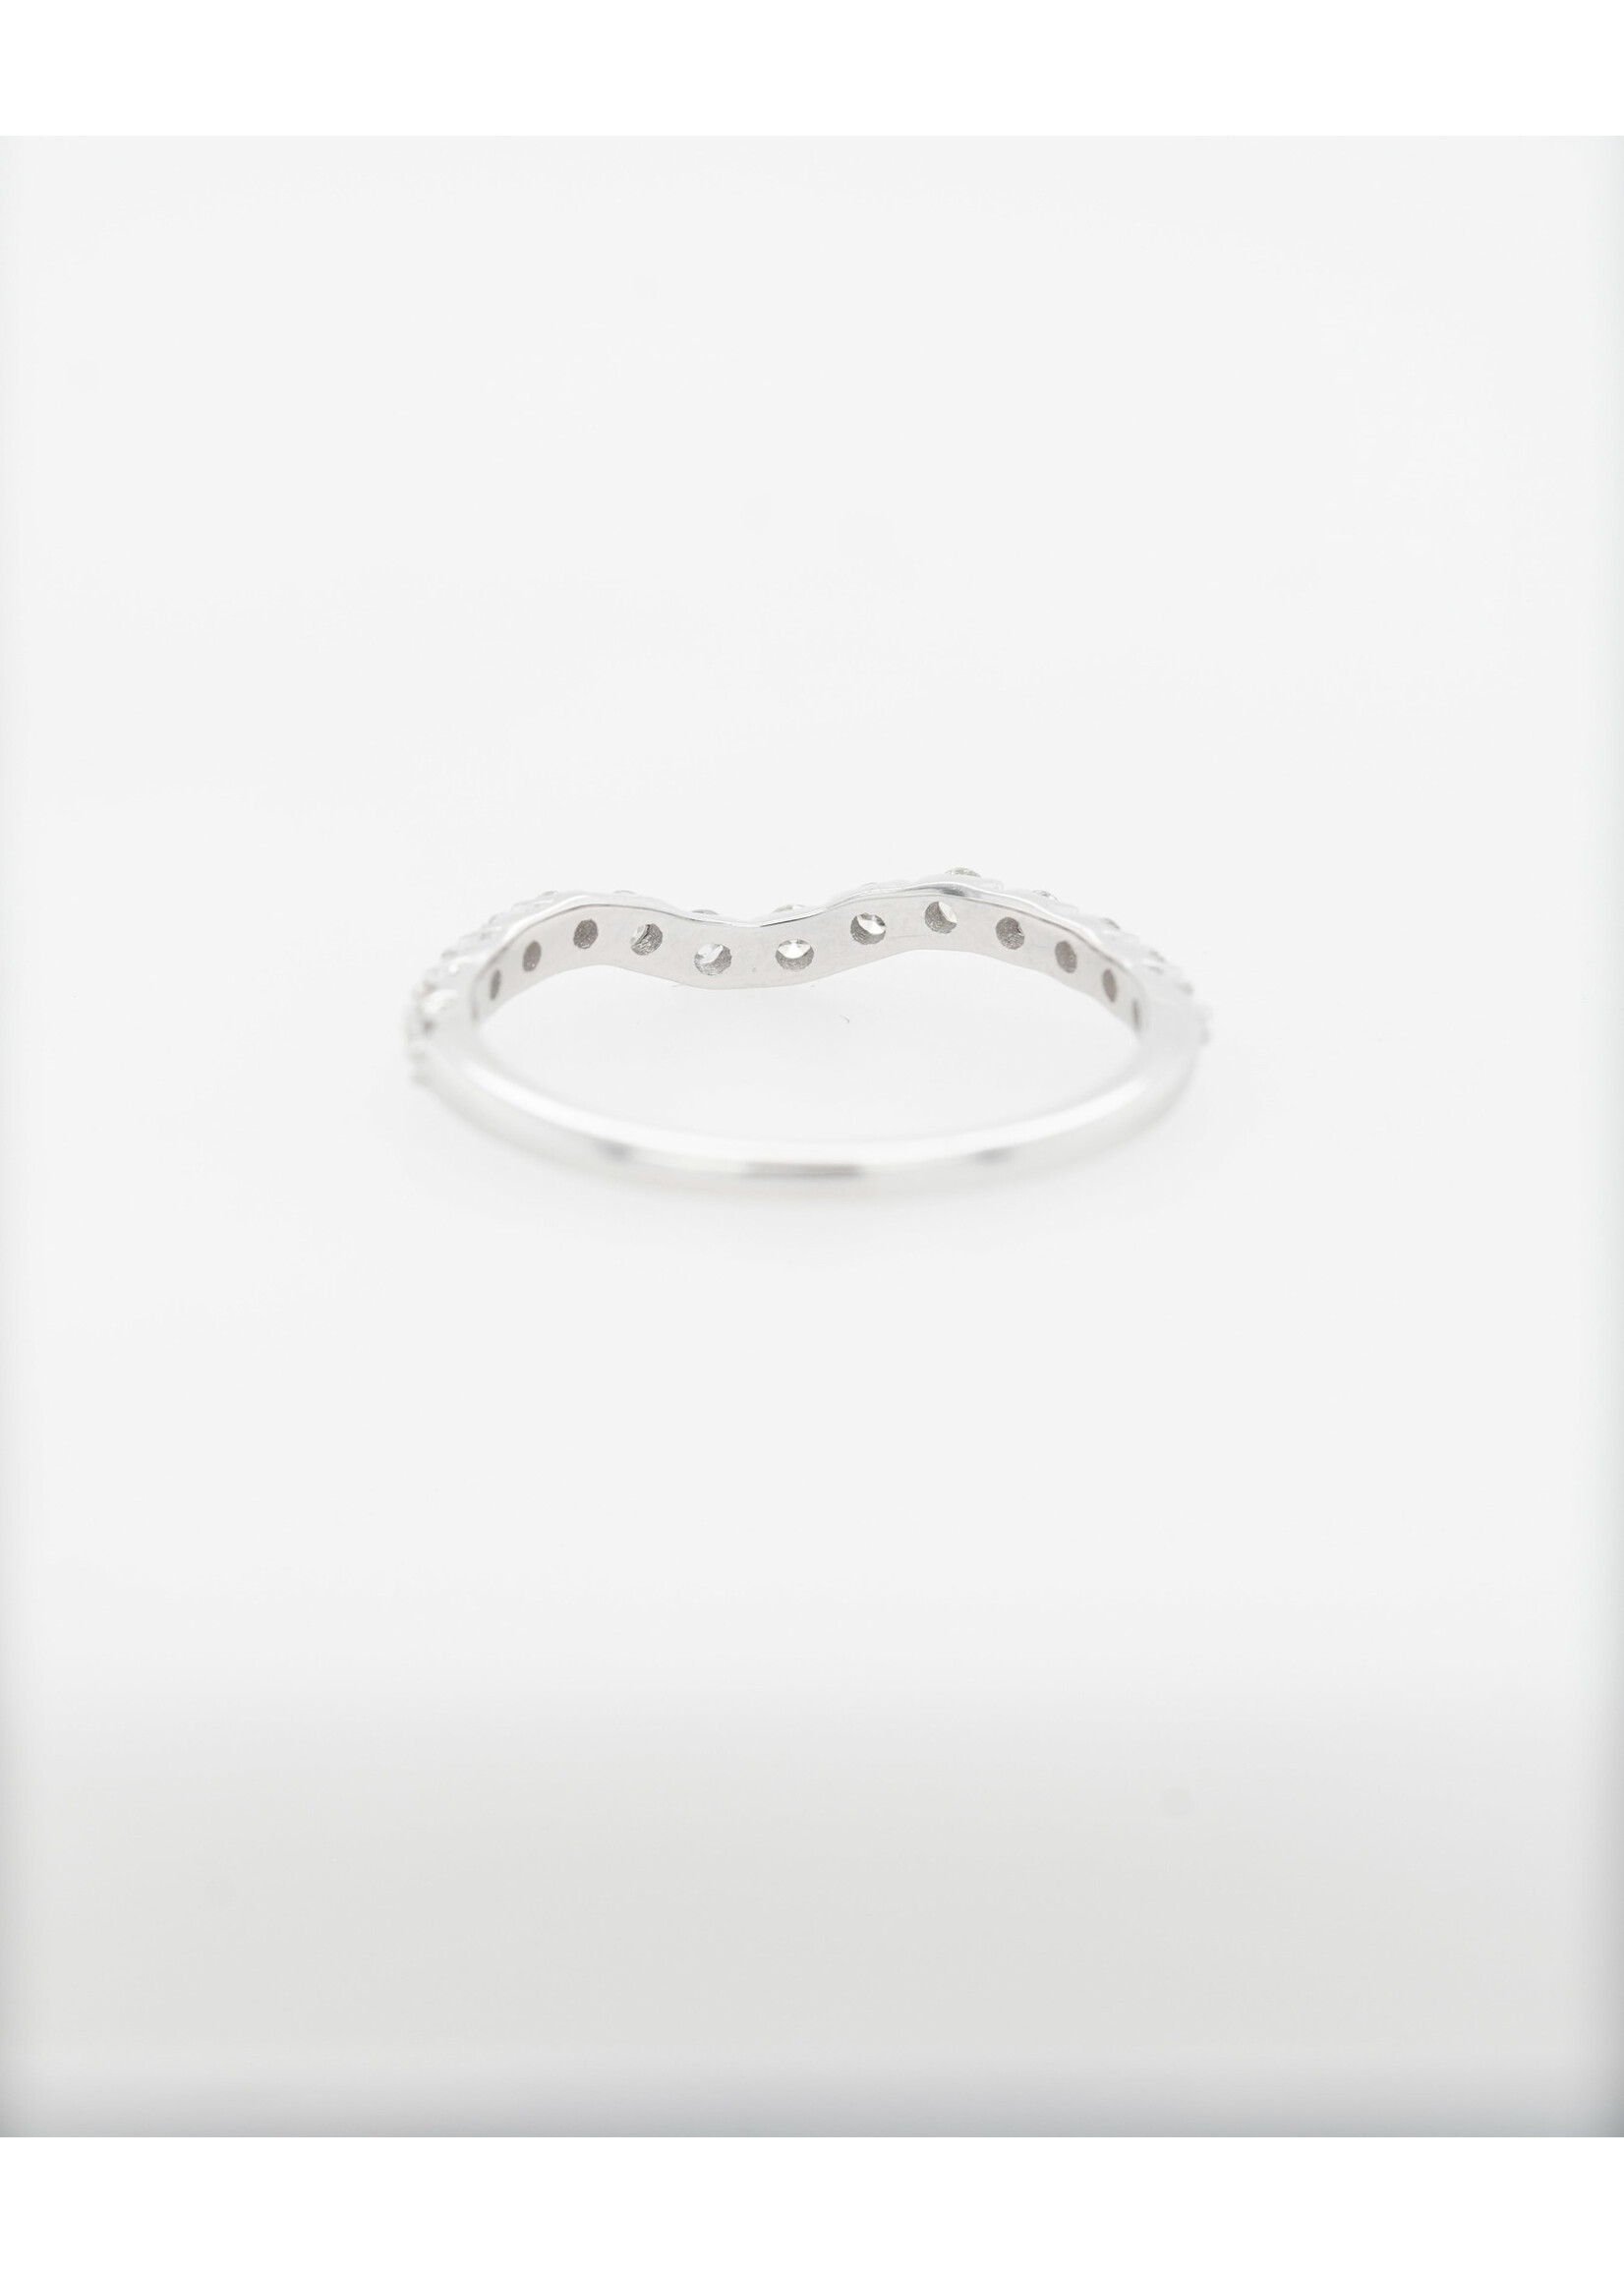 14KW 1.5g .28ctw Curved Diamond Stackable Band (size 7)